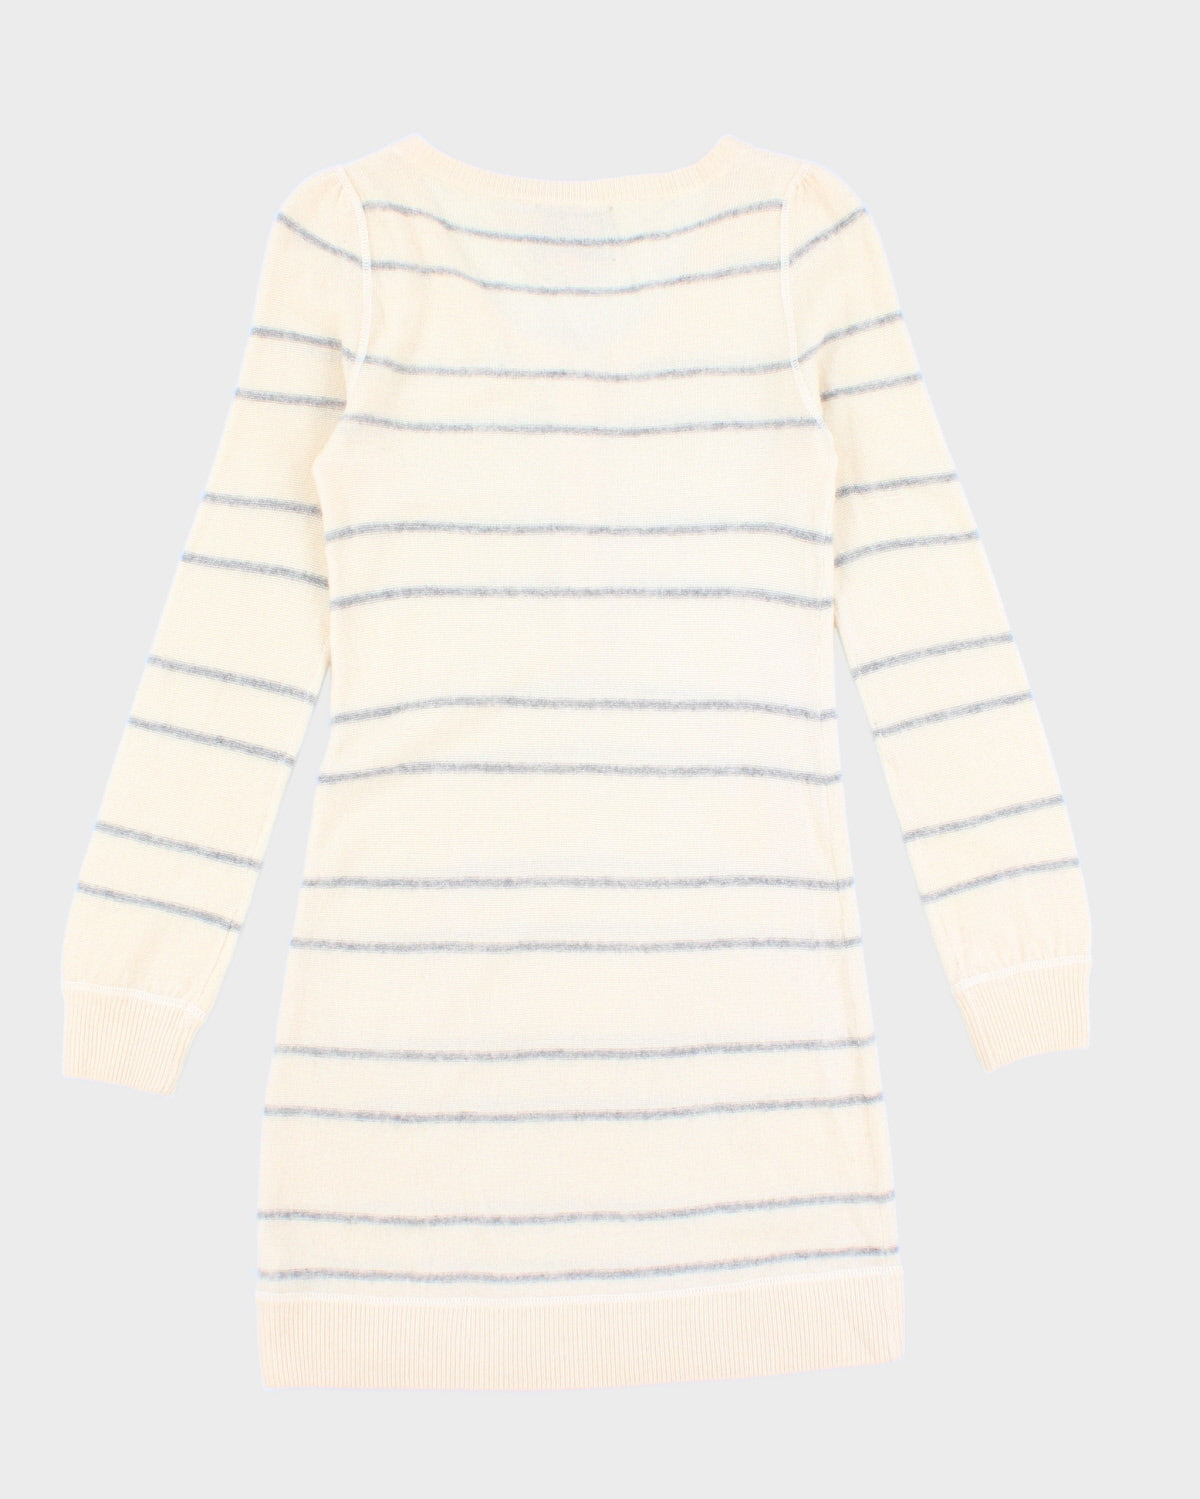 00s Juicy Couture Wool Blend Dress - S